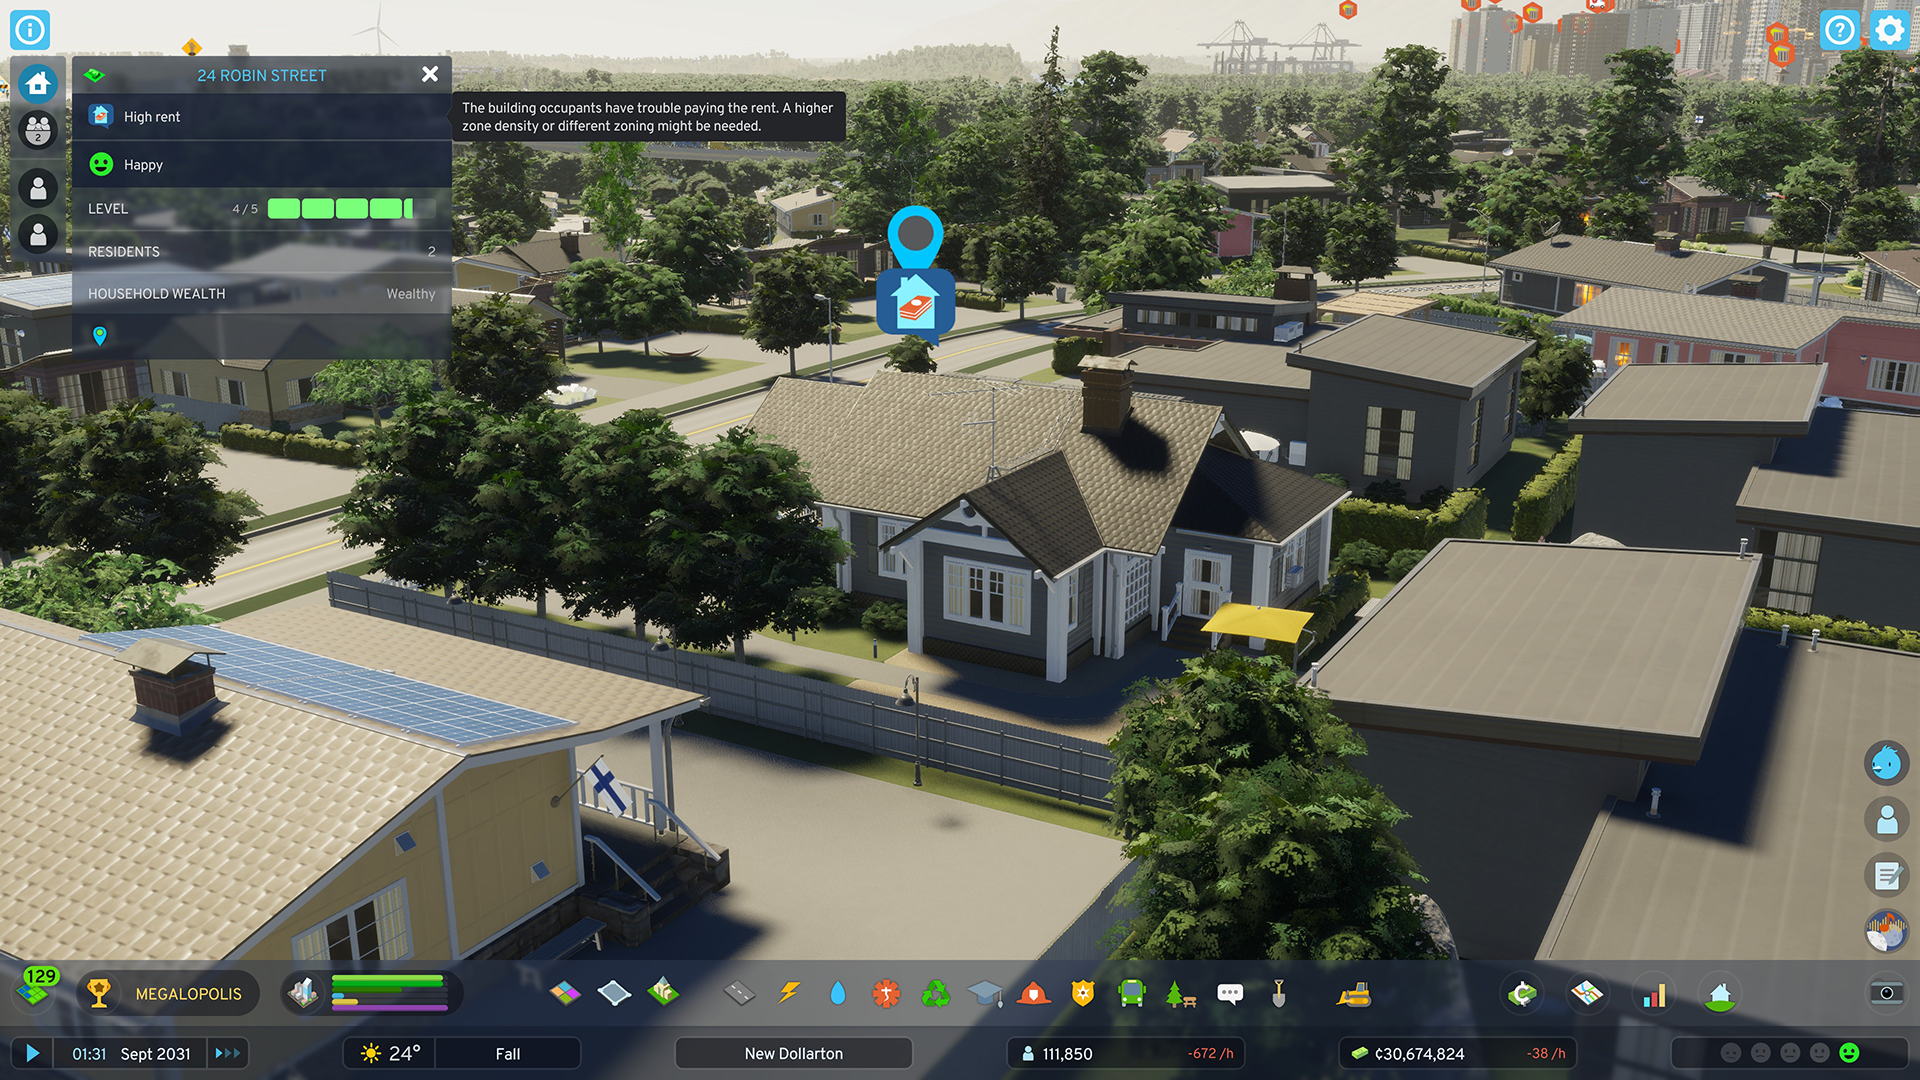 Cities Skylines 2 devs found a bug, so turned it into a feature